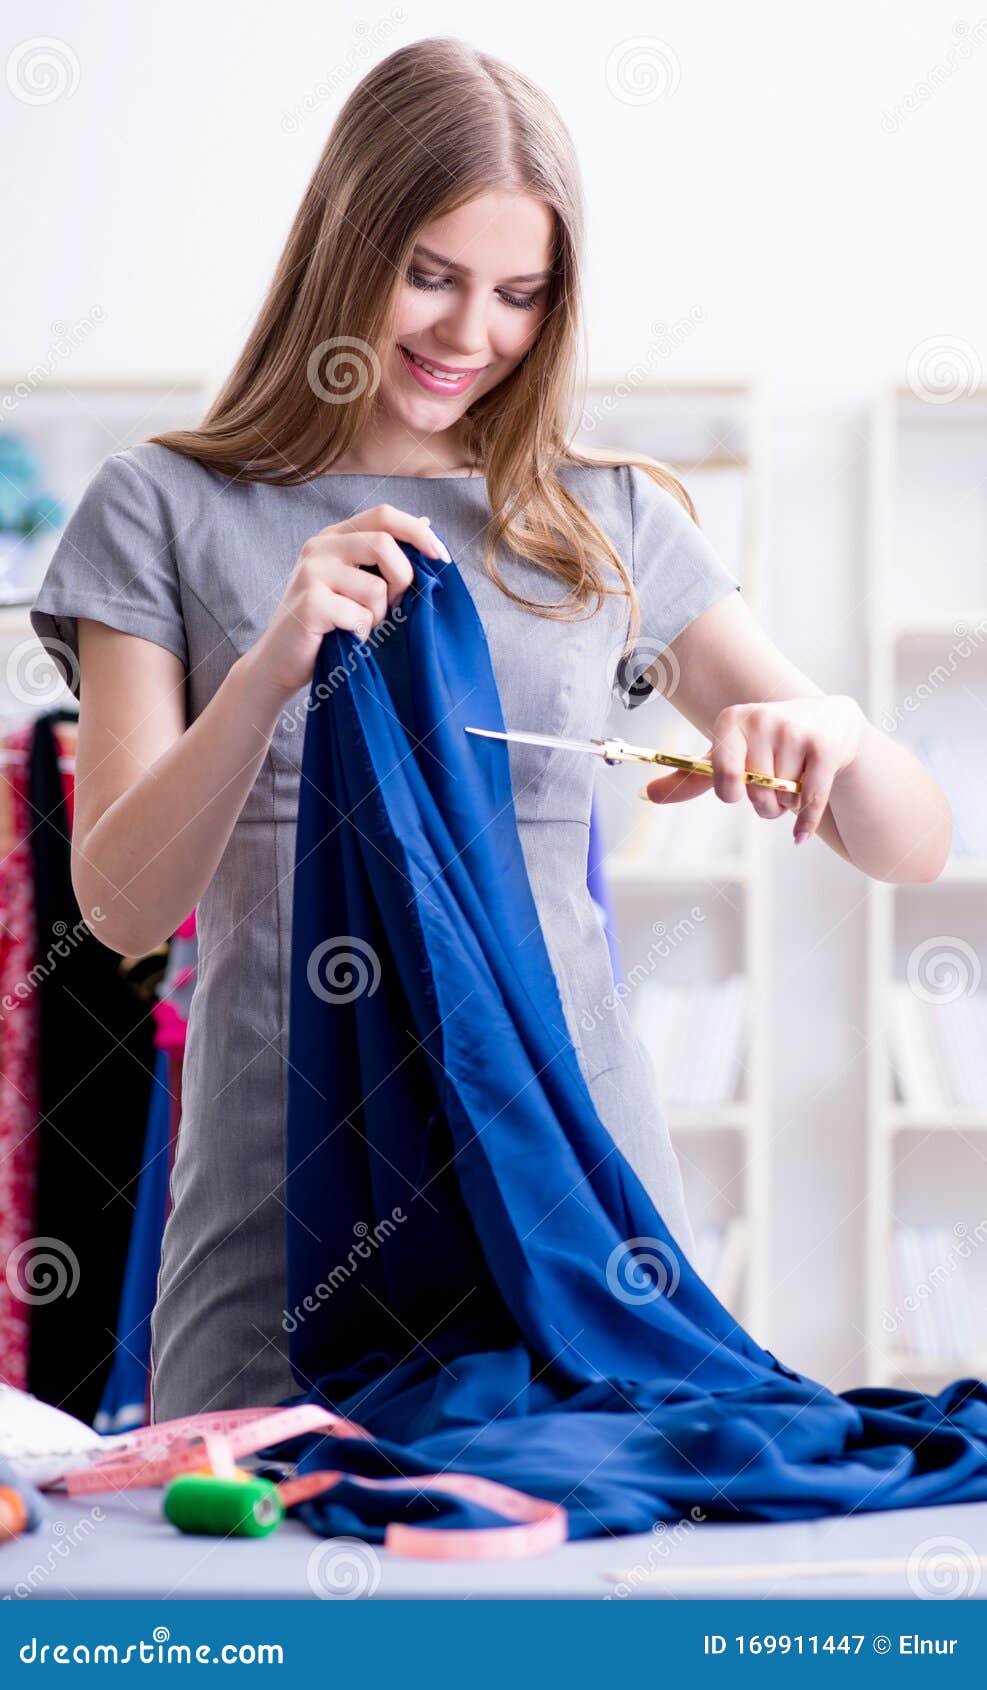 Young Woman Tailor Working in Workshop on New Dress Stock Image - Image ...